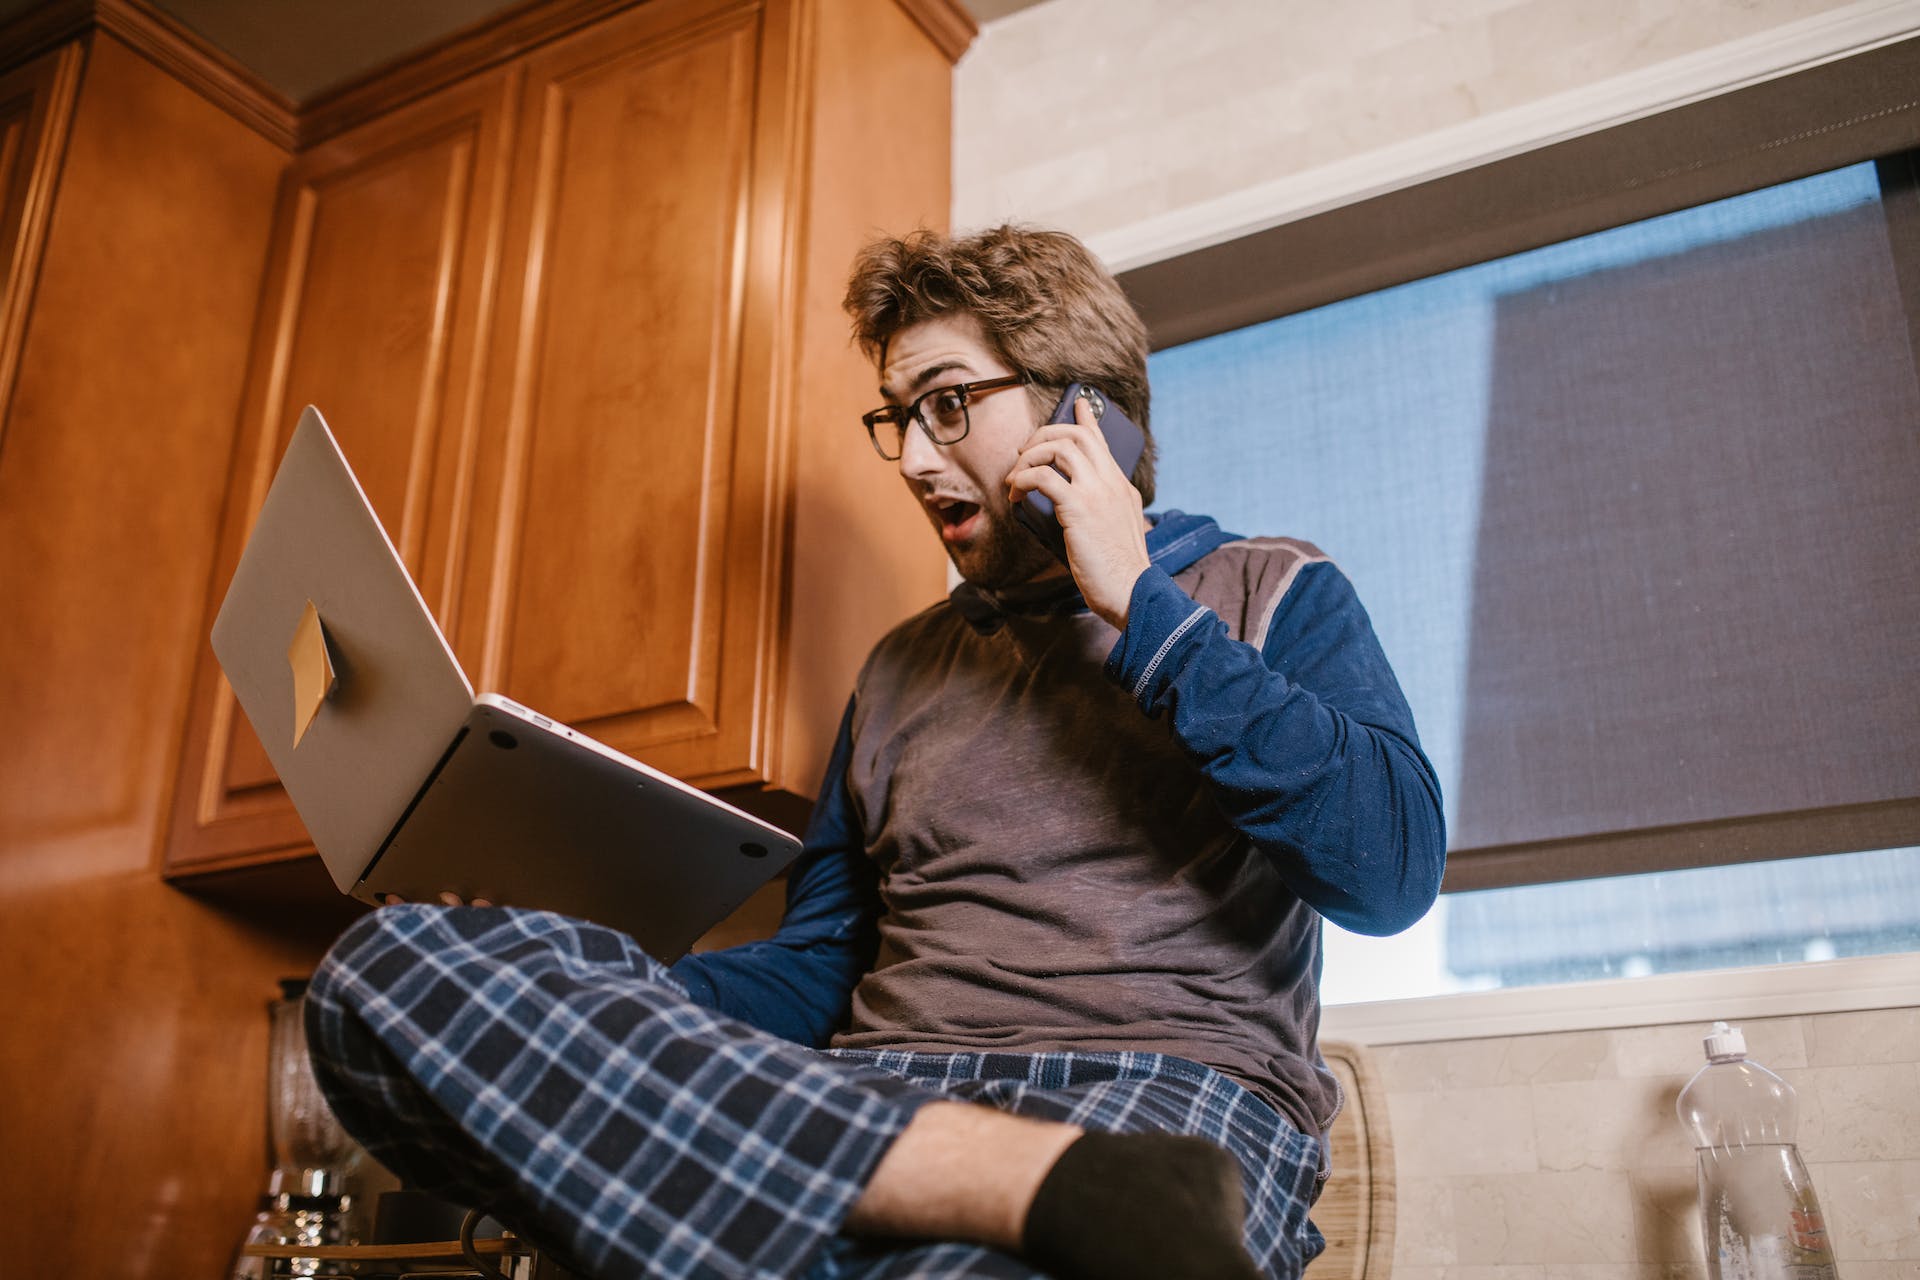 A surprised man looking at his laptop while talking on his phone | Source: Pexels